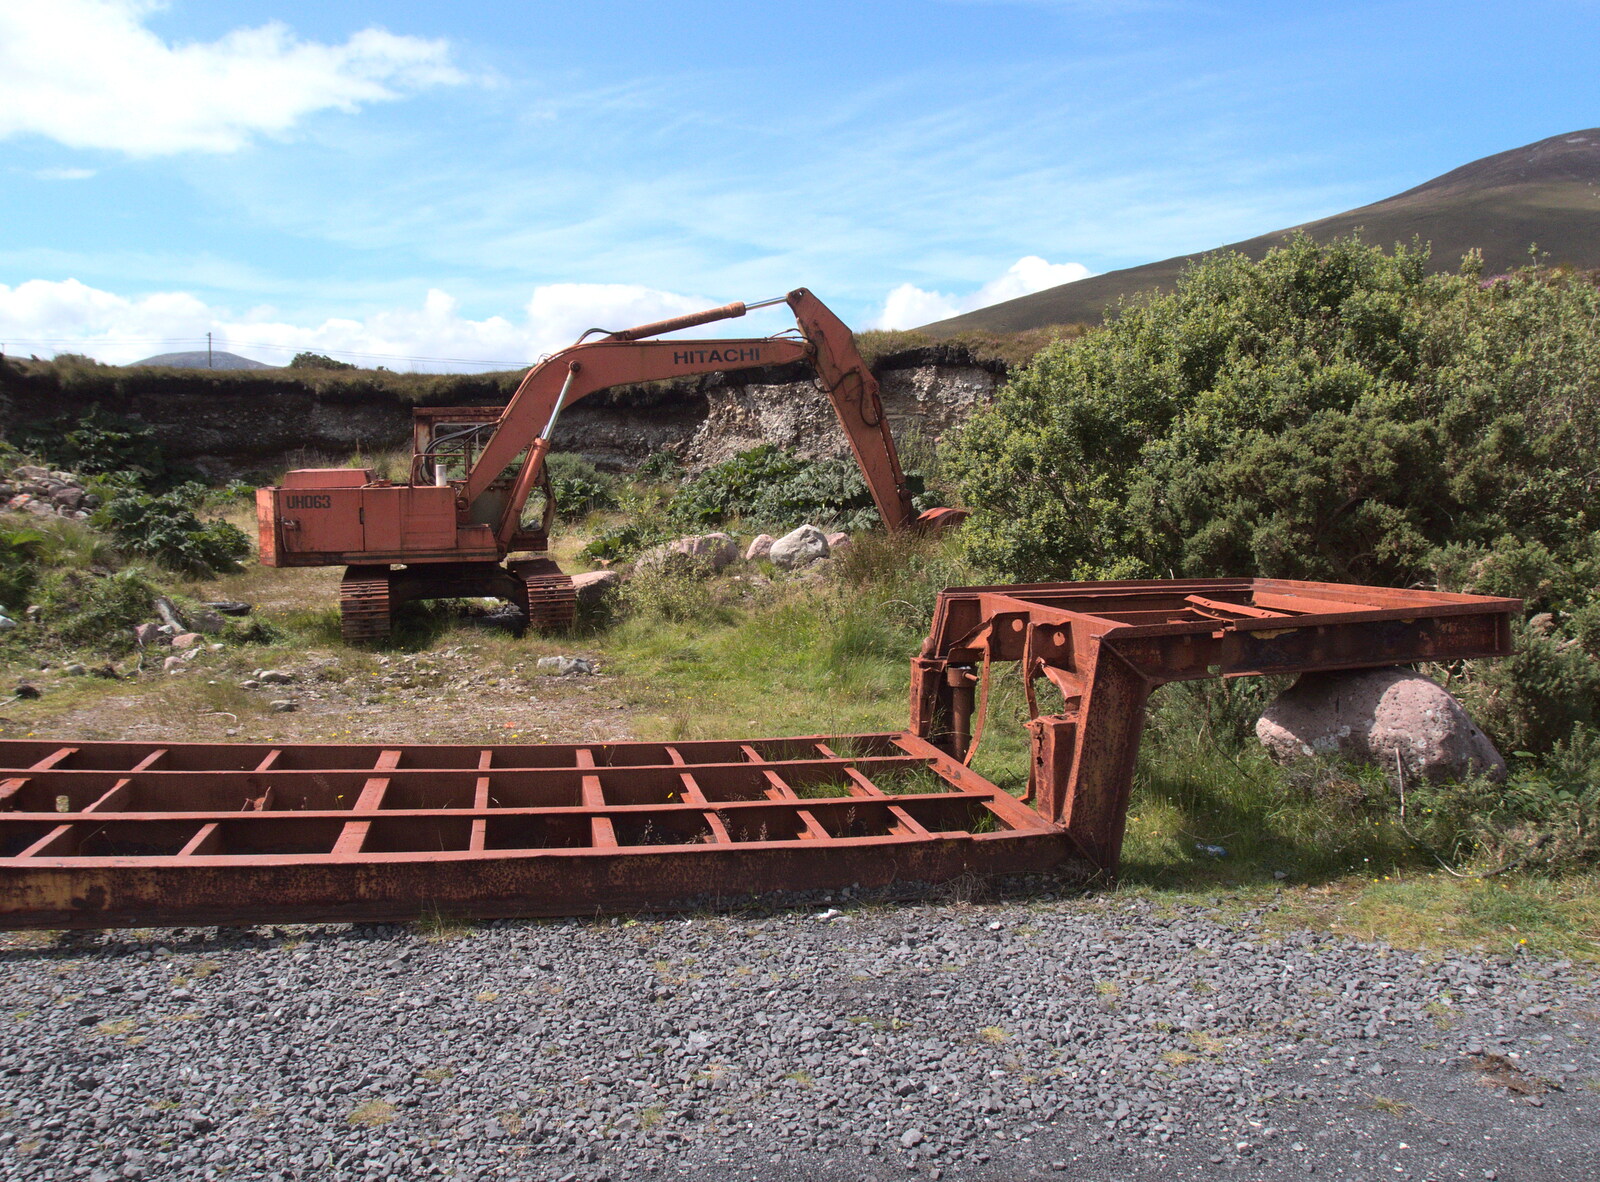 A derelict digger from A Bike Ride to Mulranny, County Mayo, Ireland - 9th August 2017